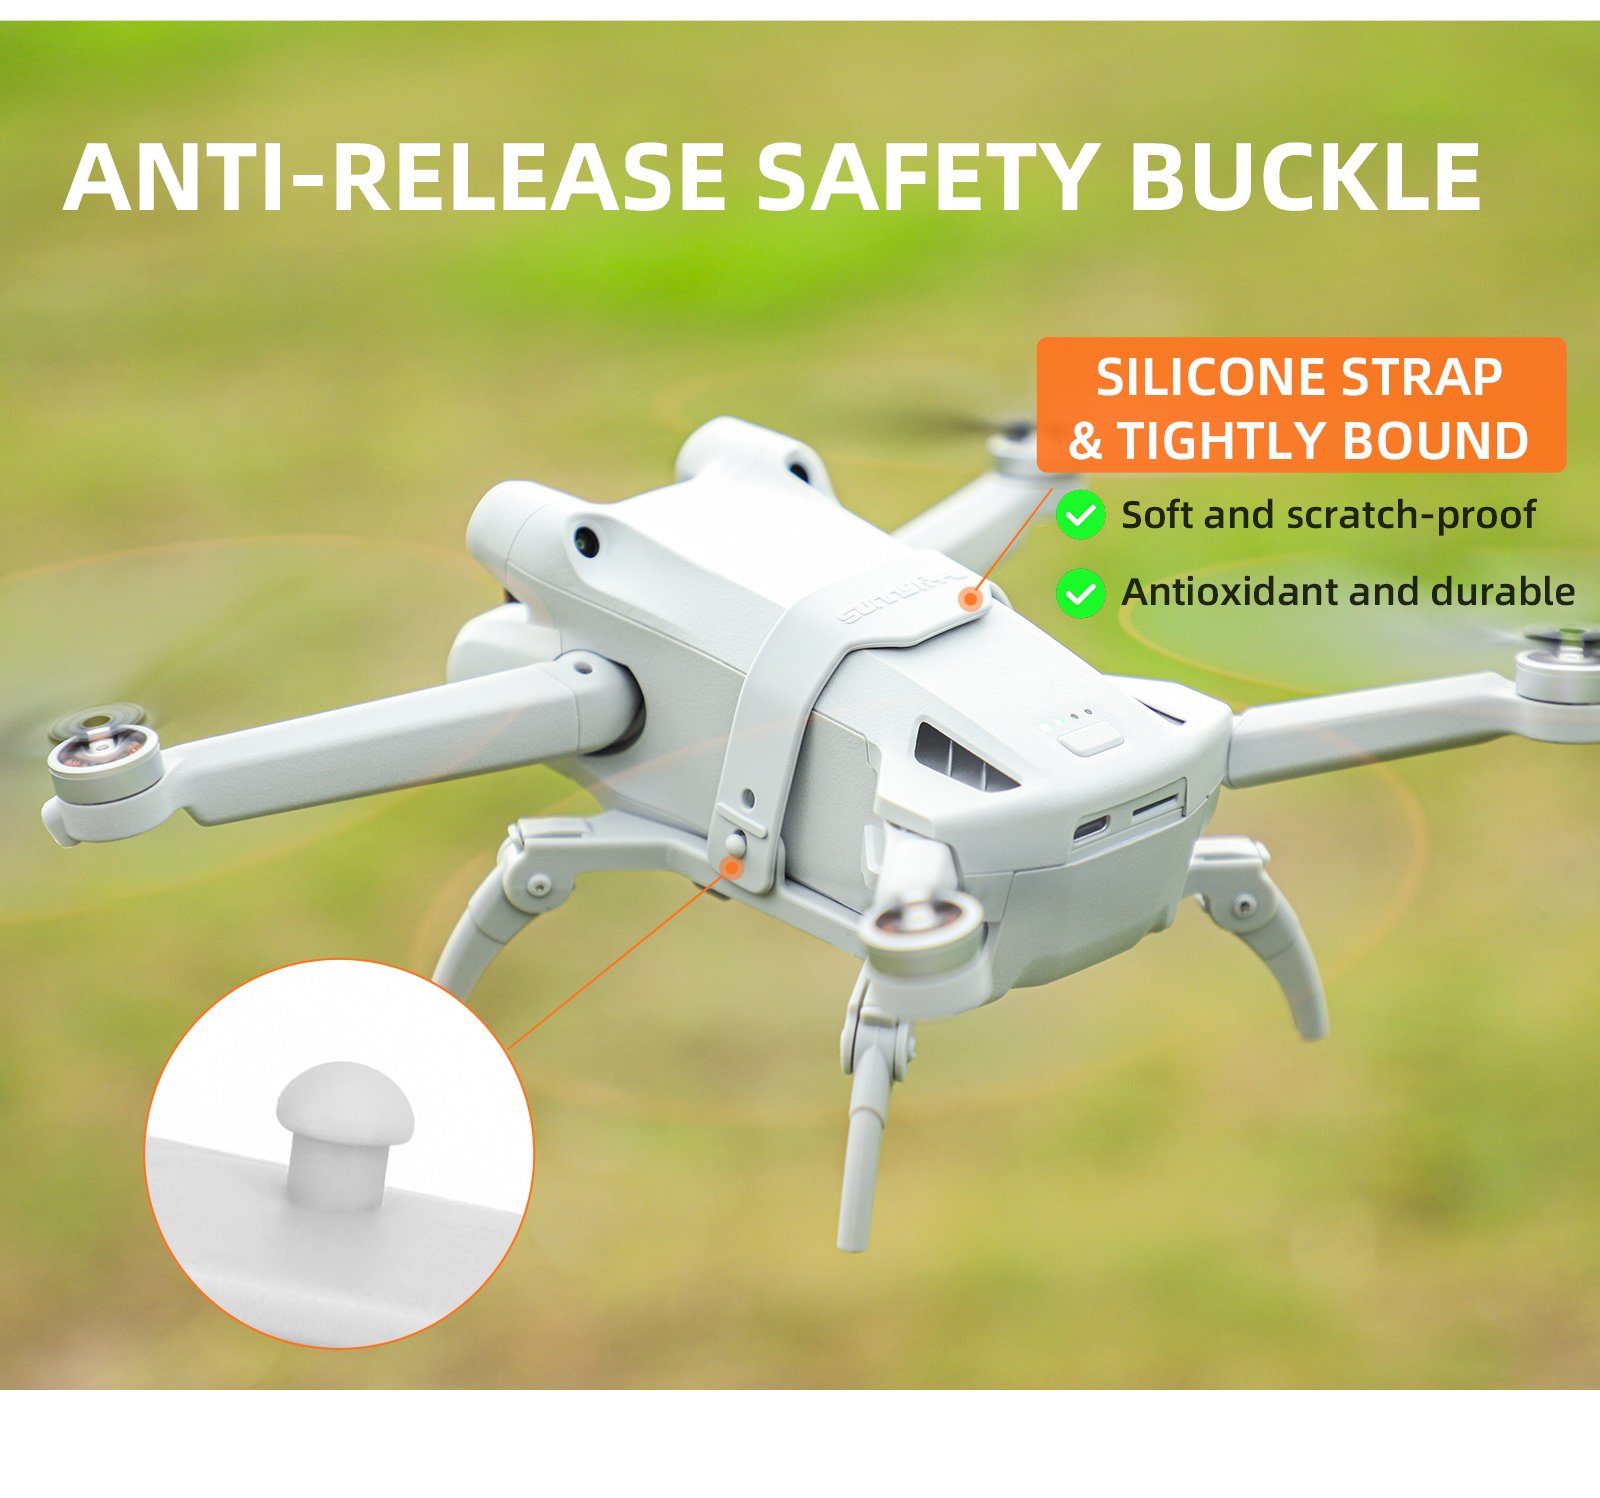 For DJI Mini 3 Pro Landing Gear Protector Accessories Foldable Extension Legs Protective Support Legs Extender